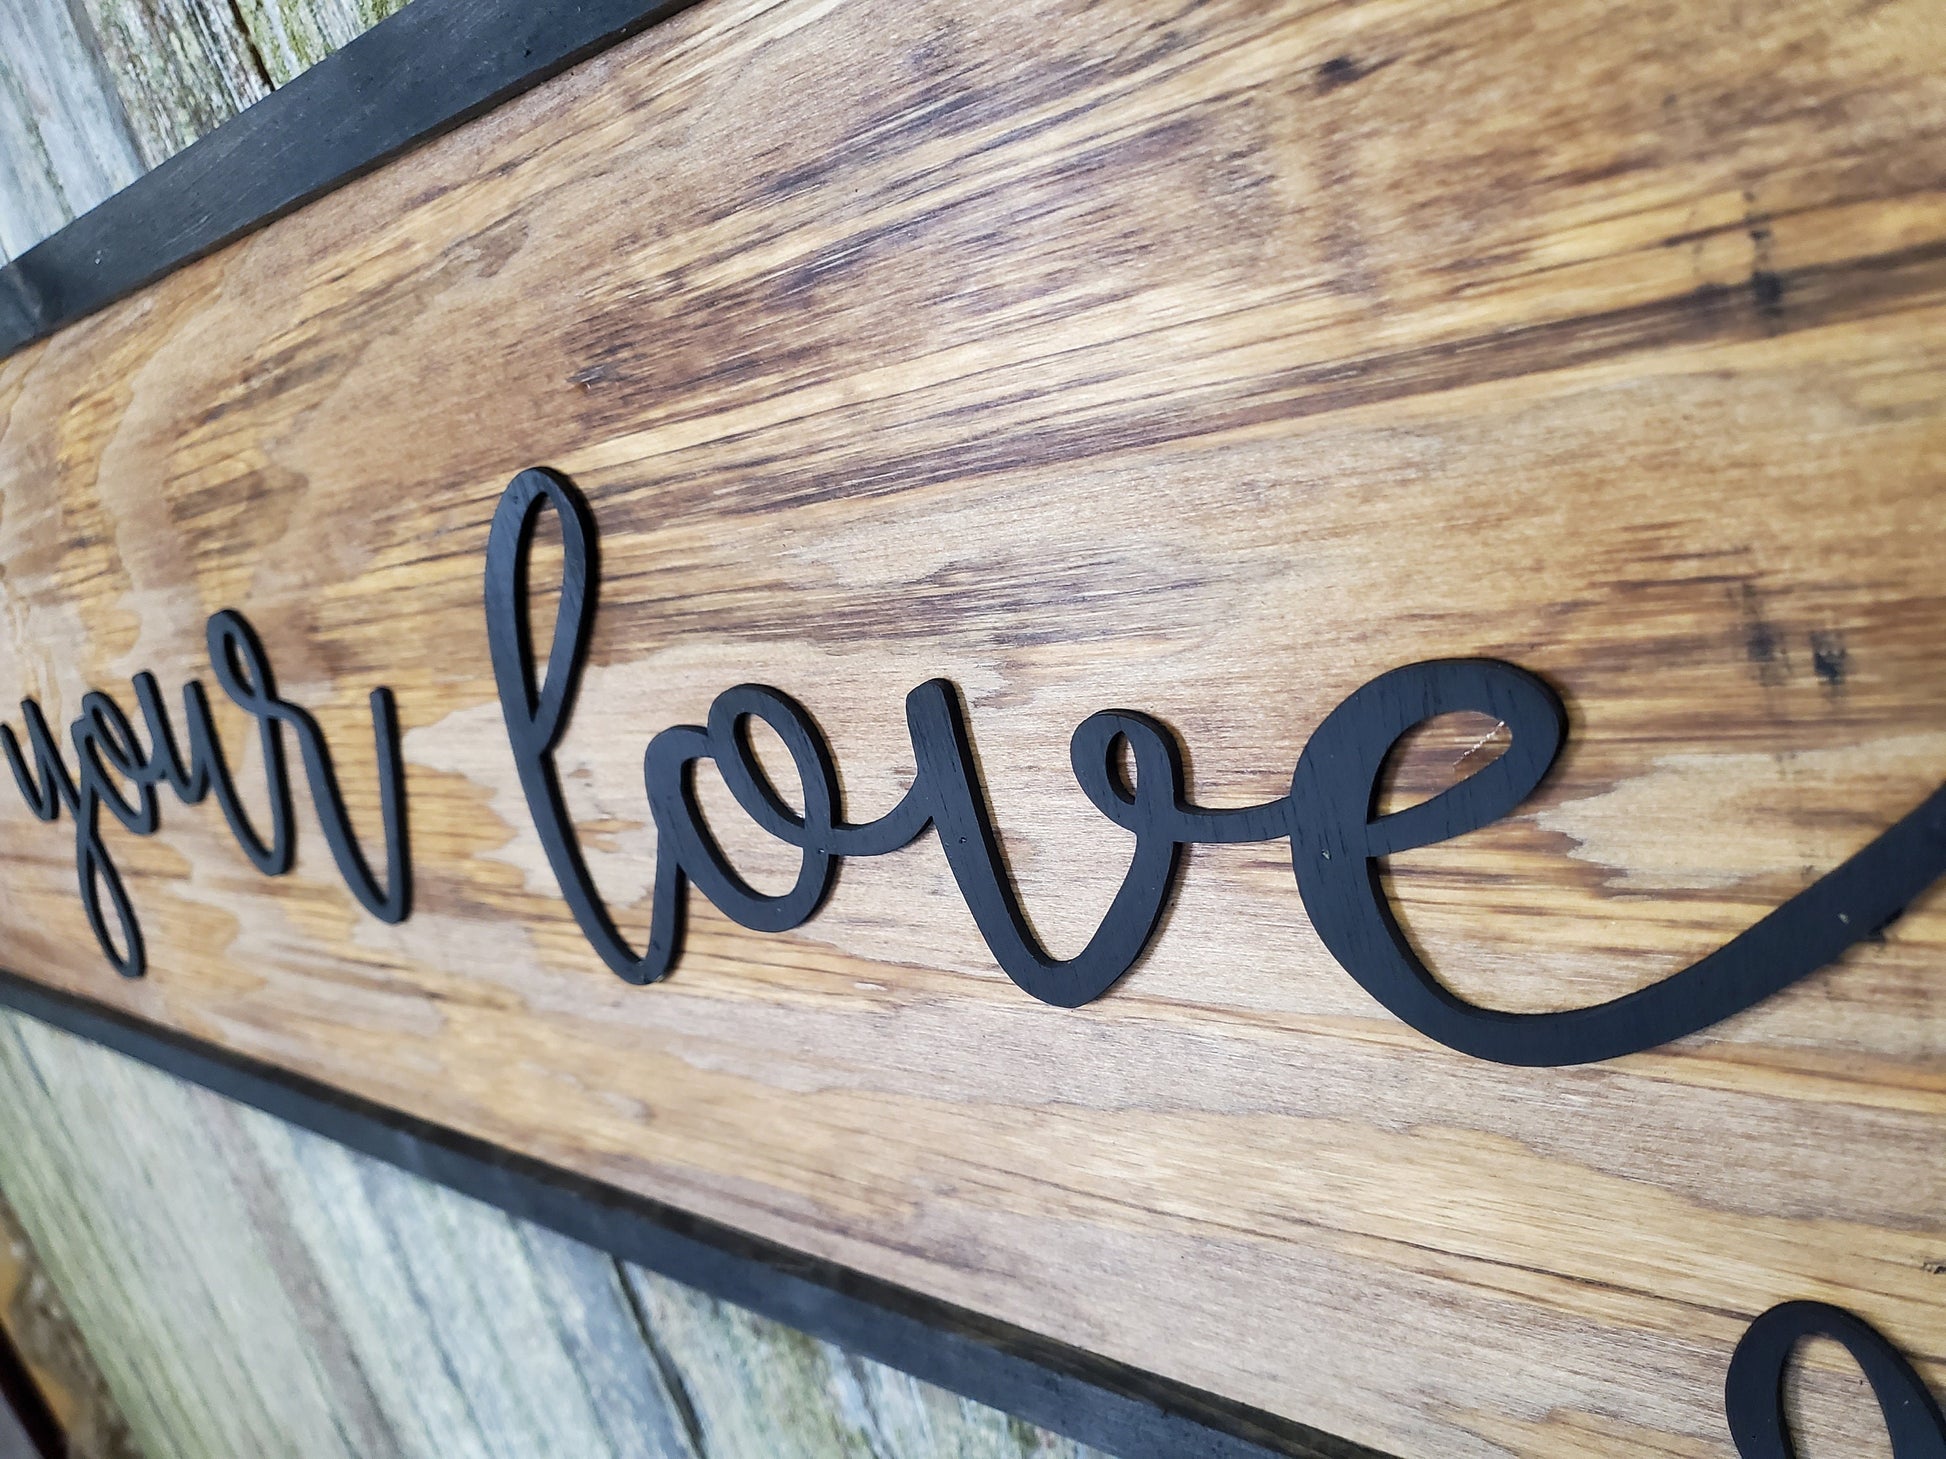 Its Your Love Large Custom Established Sign Wedding Gift Country Rustic Wood 3D Raised Text Wooden Framed Shabby Chic Cabin Decor